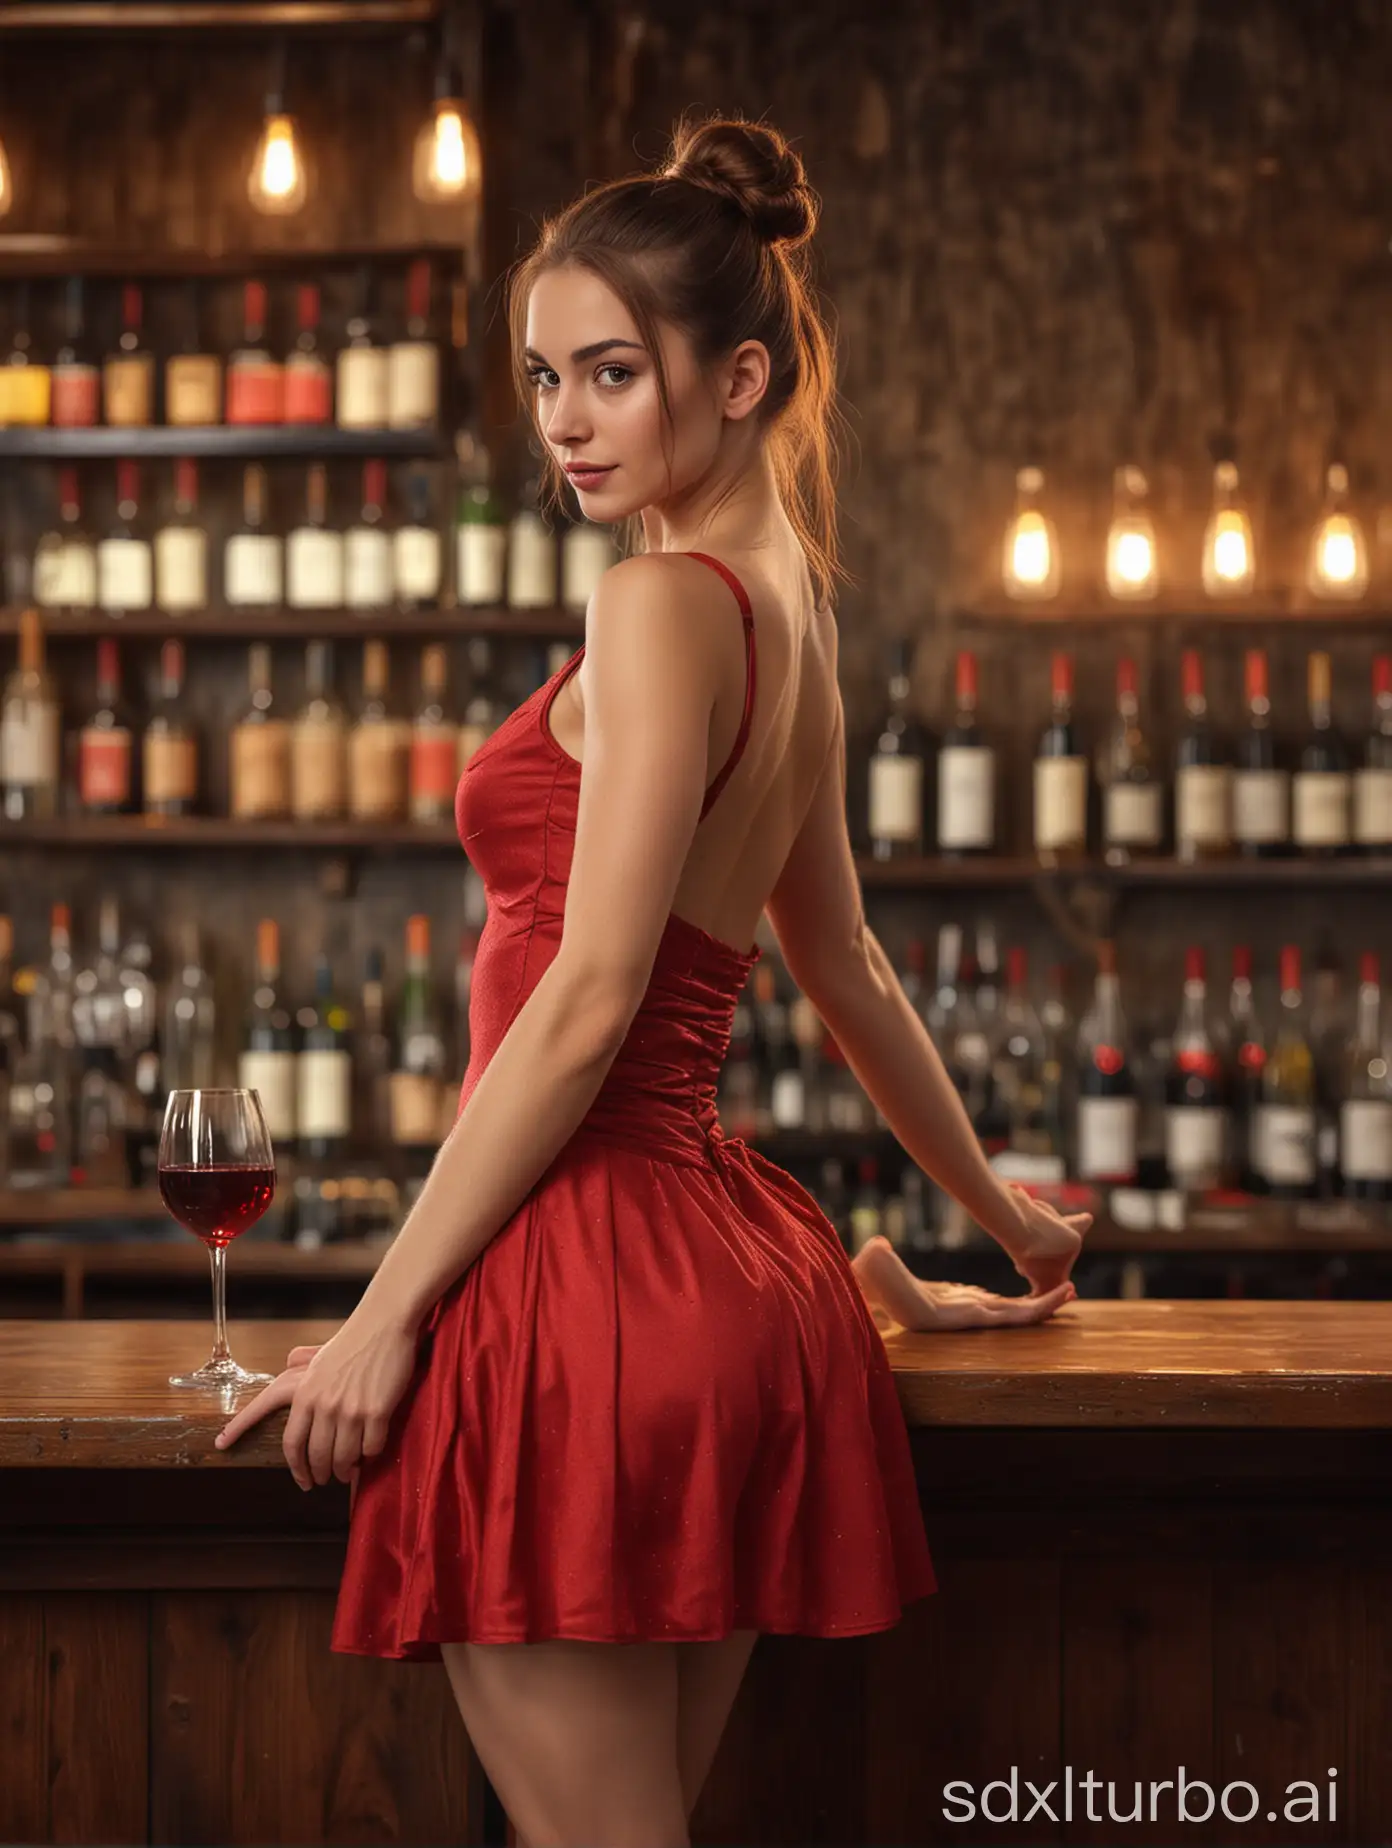 young caucasian woman, long brown hair tied up as ballerina bun, slim body, wearing red sexy sleeveless  dress, in a bar, a glass of wine nearby, in the evening, background bokeh, realistic, front viewyoung caucasian woman, long brown hair tied up as ballerina bun, slim body, wearing red sexy sleeveless  dress, in a bar, a glass of wine nearby, in the evening, background bokeh, realistic, front view